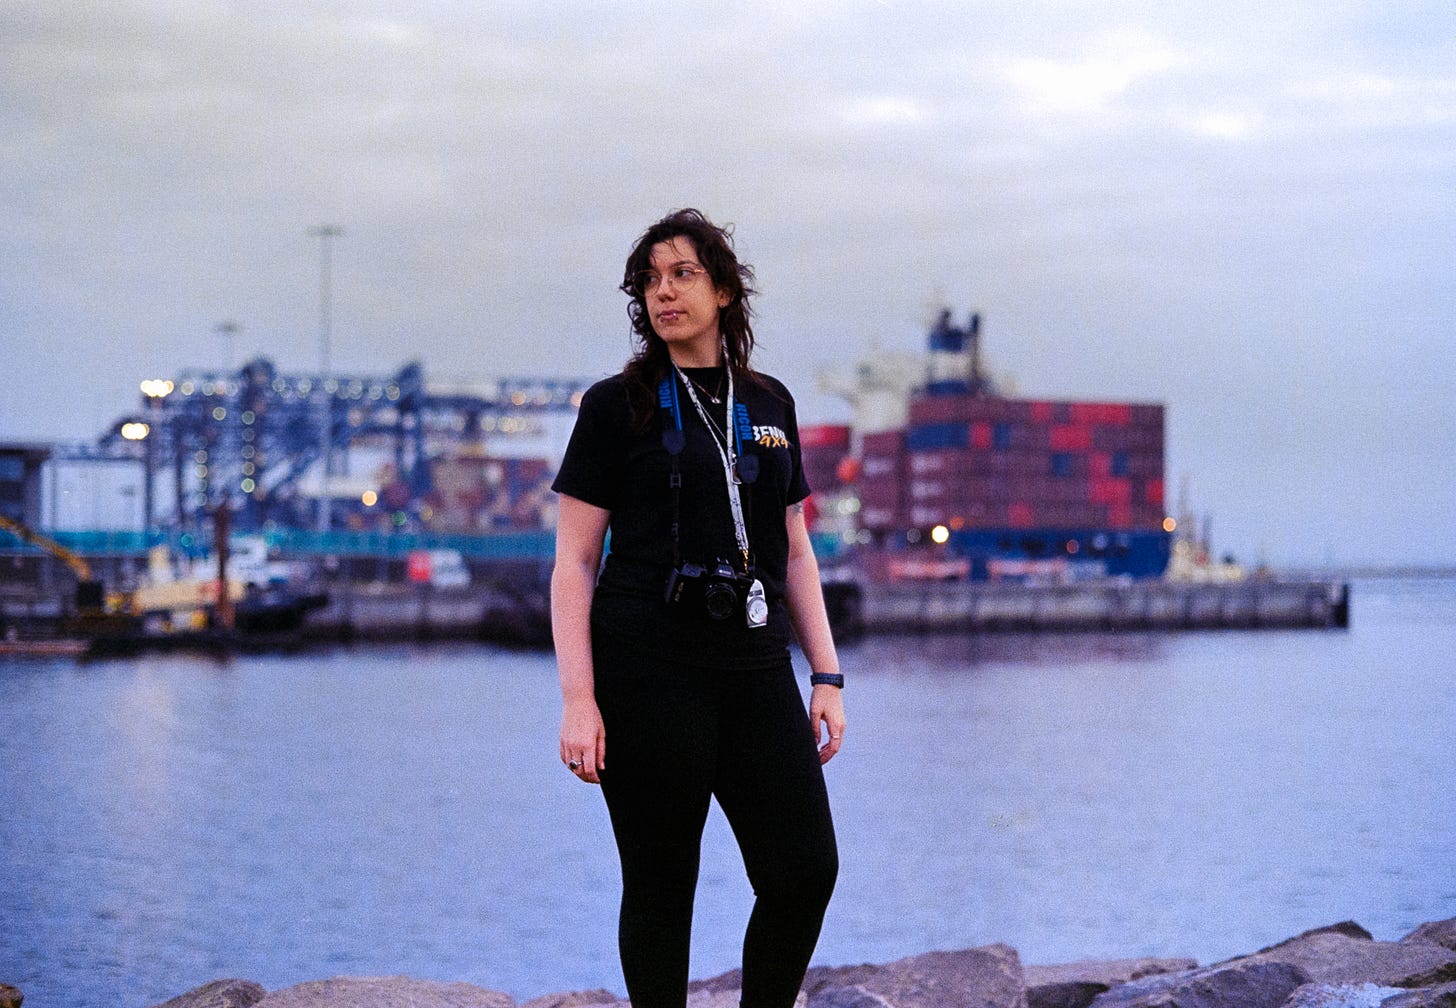 A photo of Josie captured on film, she's wearing all black with a camera around her neck, looking over her shoulder. Shipping containers are being loaded onto a barge in the background